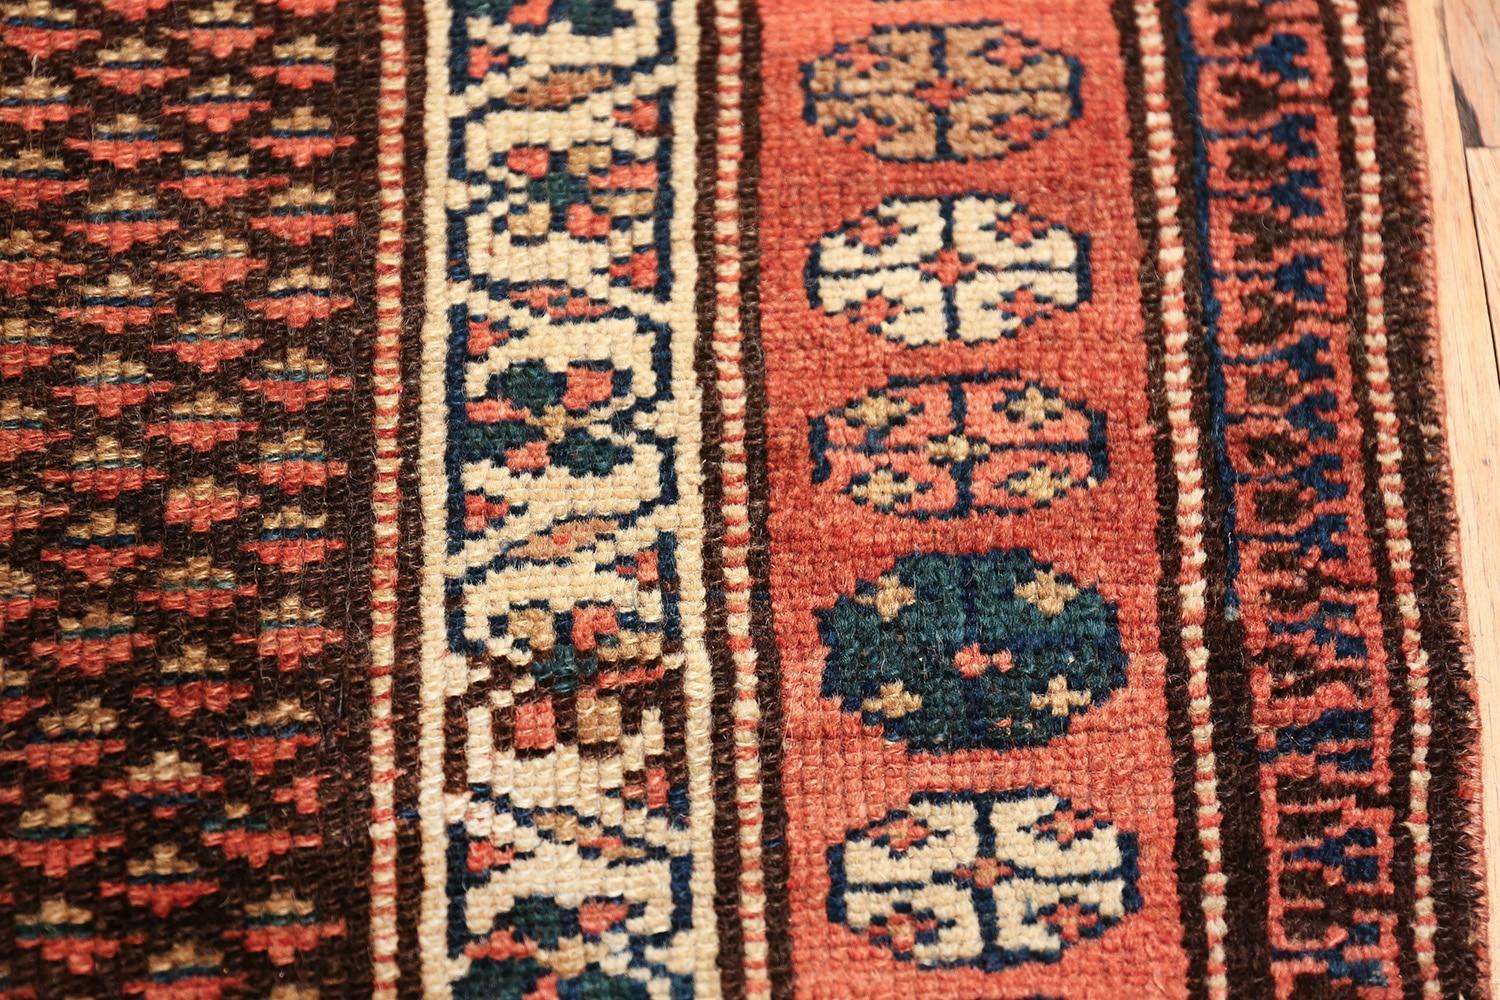 Beautiful antique Tribal Northwest Persian runner rug, country of origin / rug type: Persian tug, date: circa 1900. Size: 3 ft 4 in x 10 ft 4 in (1.02 m x 3.15 m). 

Simplicity in design and contrast are used to create a uniquely tribal design in